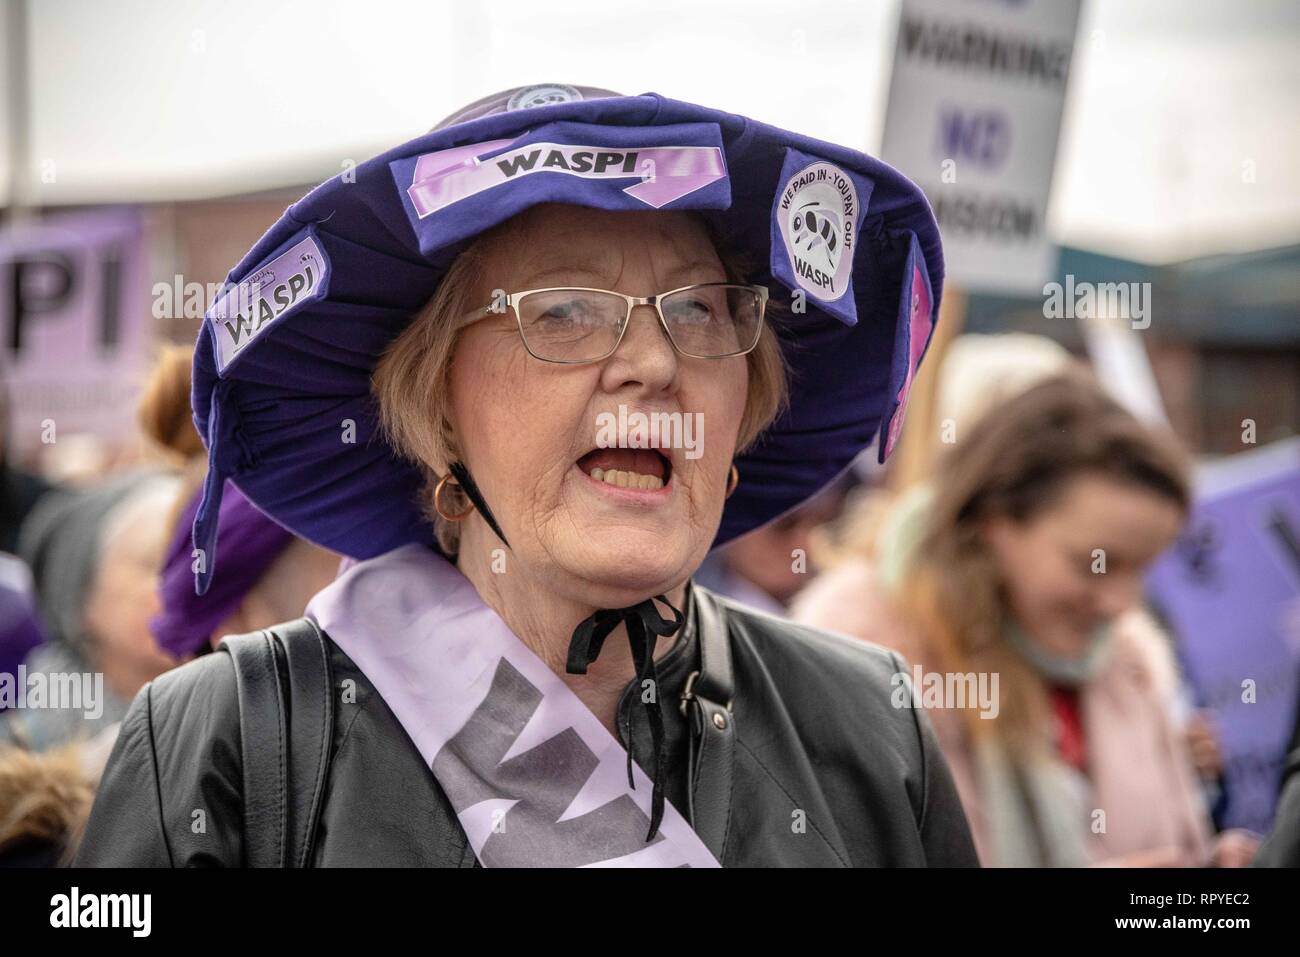 A protester is seen shouting slogans during the demonstration. Protesters from all over Scotland took part in a protest against the changes in the state pension for women. WASPI (Women Against State Pension Injustice) and several other groups took to the streets in protest over it. Stock Photo